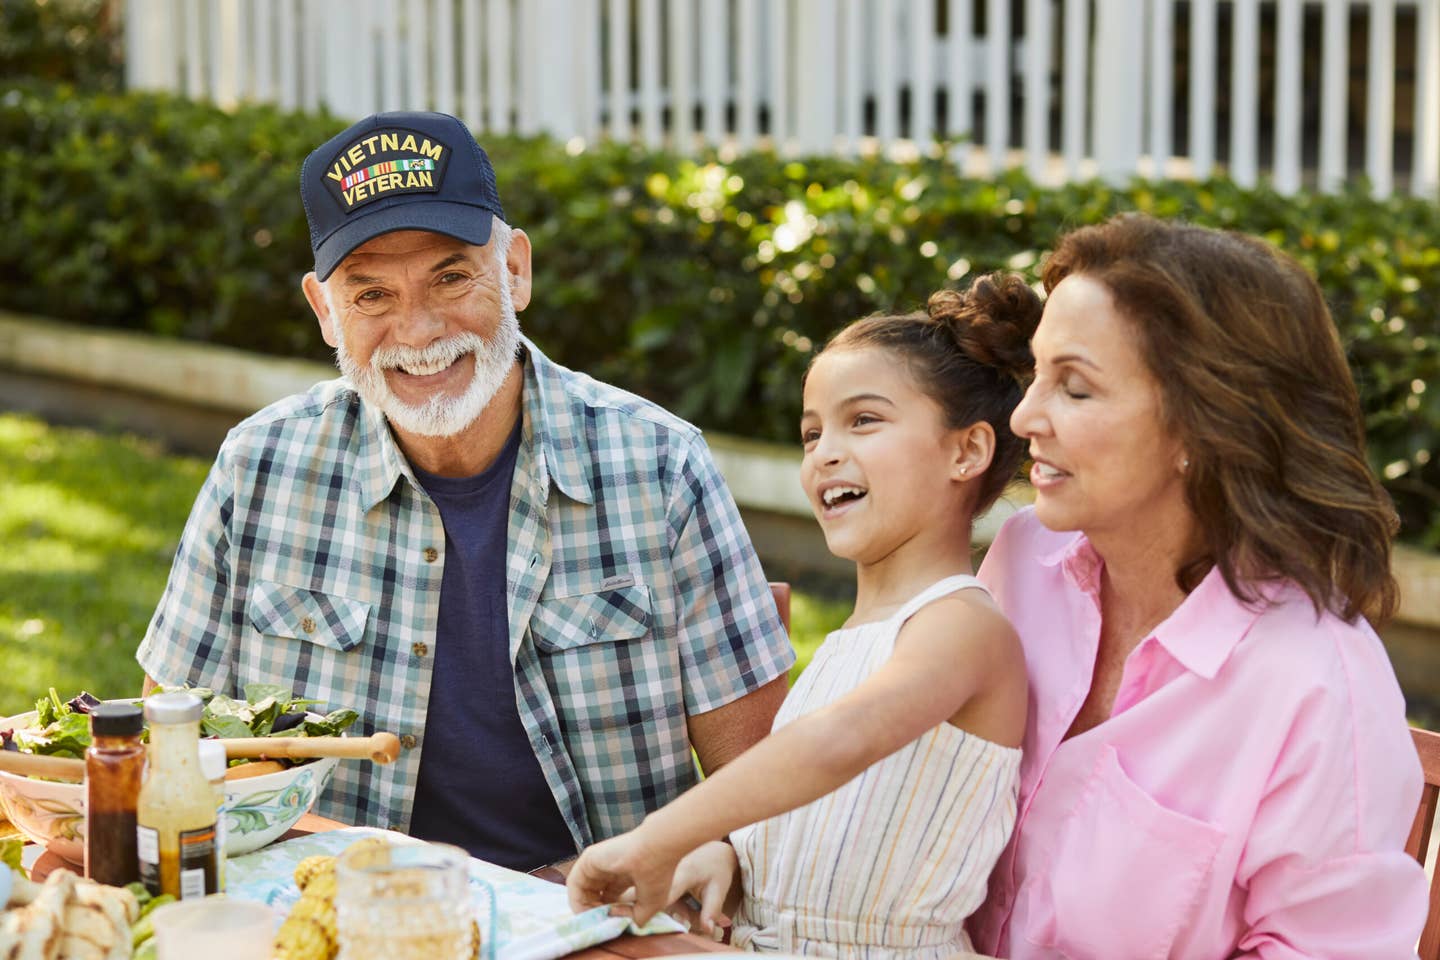 Active veteran sitting at a picnic outside with family.